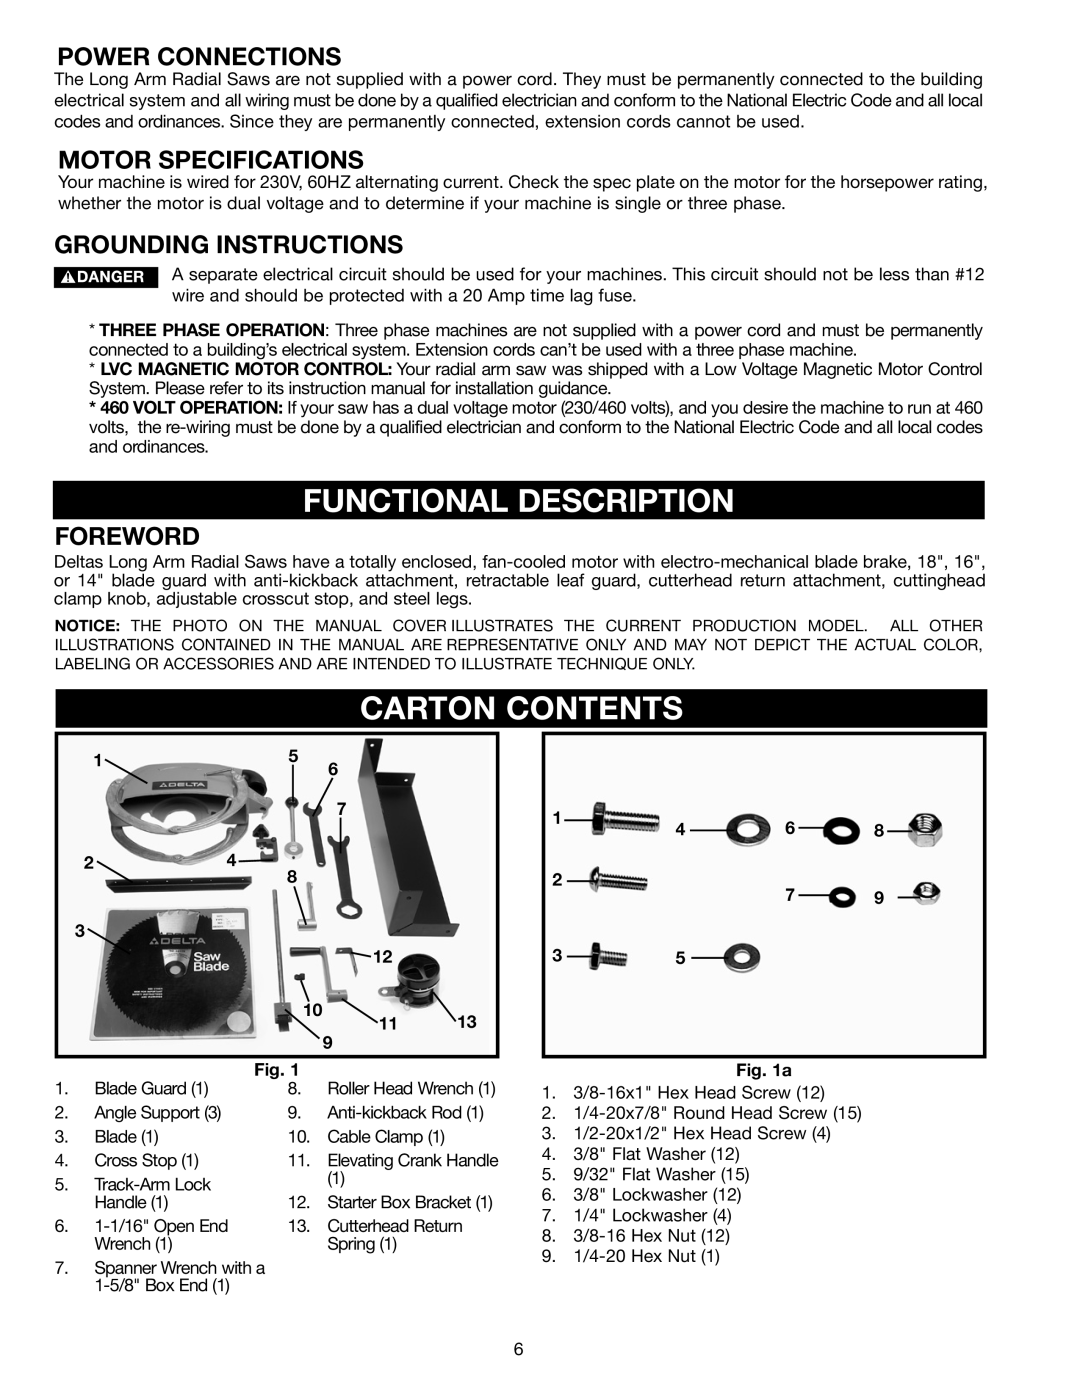 Porter-Cable 33-403, 33-400, 16 Functional Description, Carton Contents, Power Connections, Motor Specifications, Foreword 